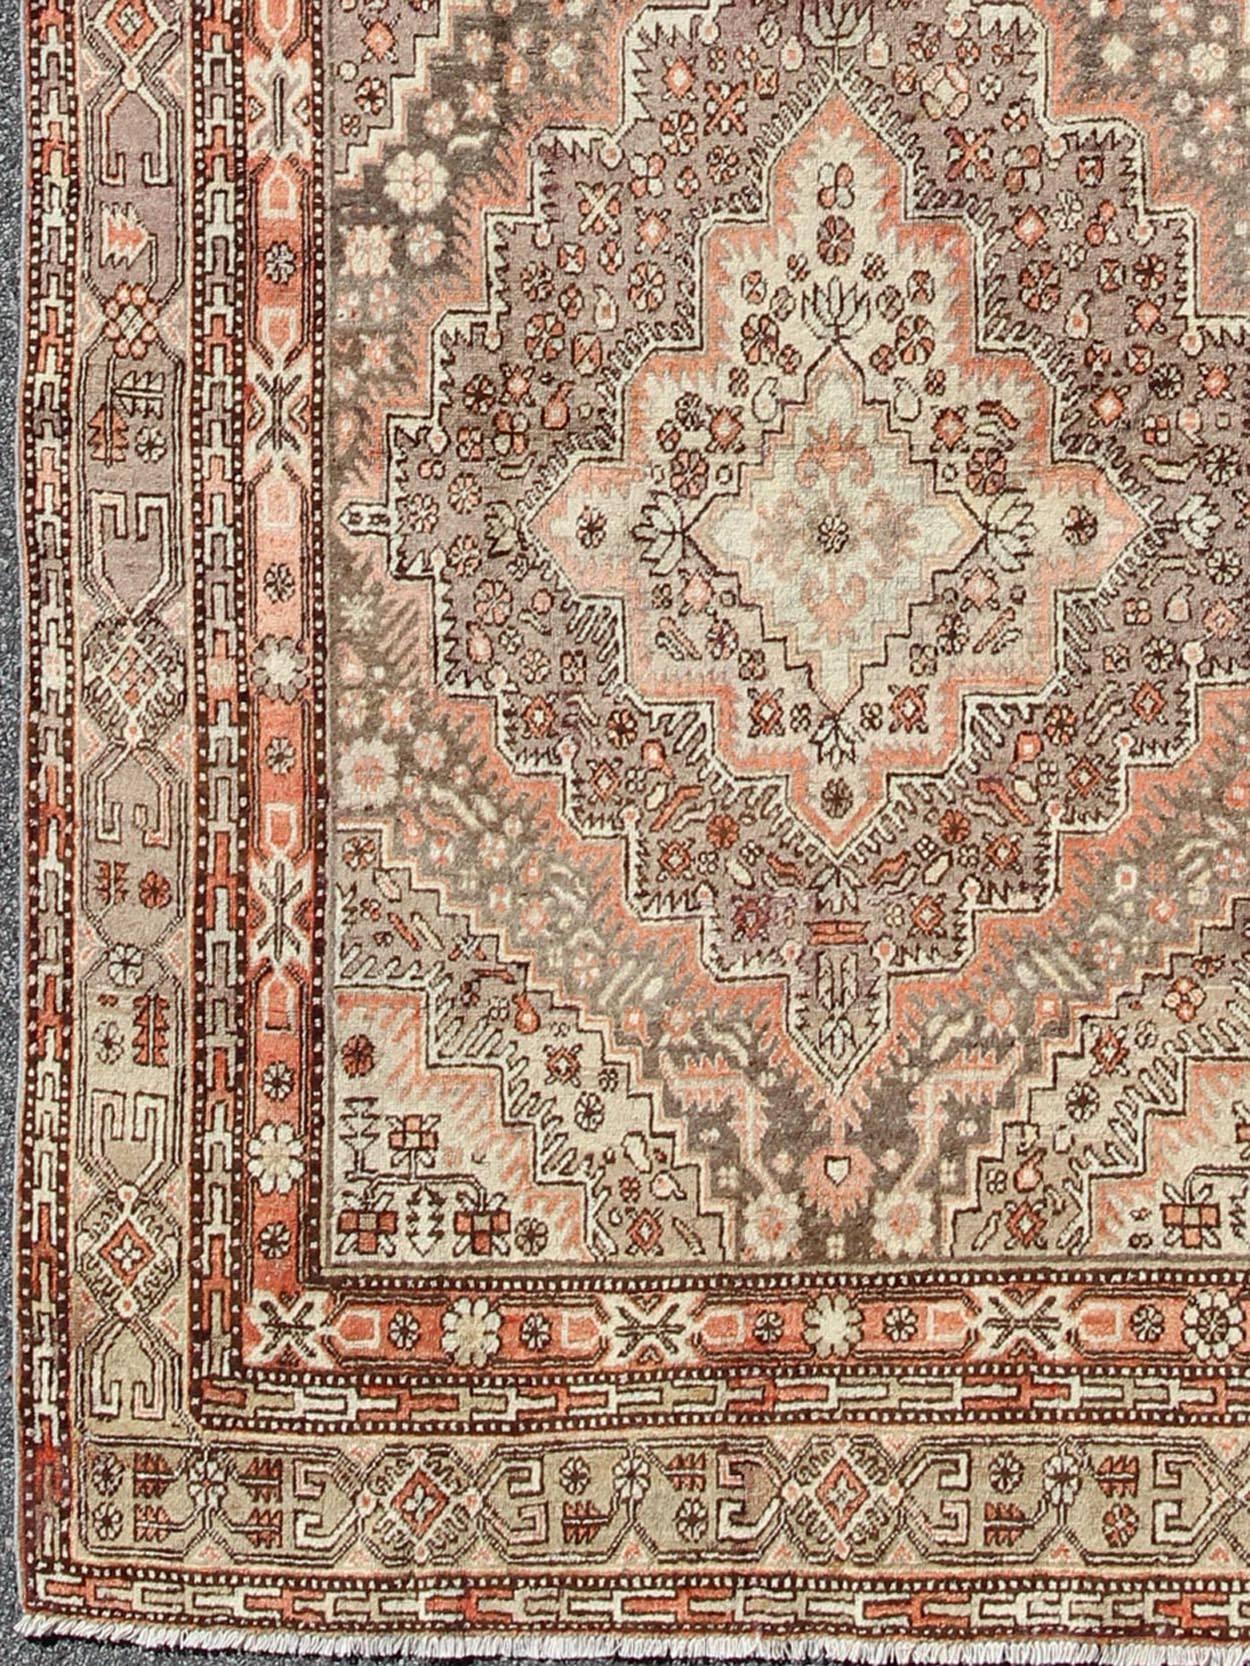 Early 20th century antique Khotan rug with paired medallions in gray and red, rug mp-1610-157264, country of origin / type: East Turkestan / Khotan, circa 1920

This delicately rendered antique Khotan rug was handcrafted in Turkestan during the